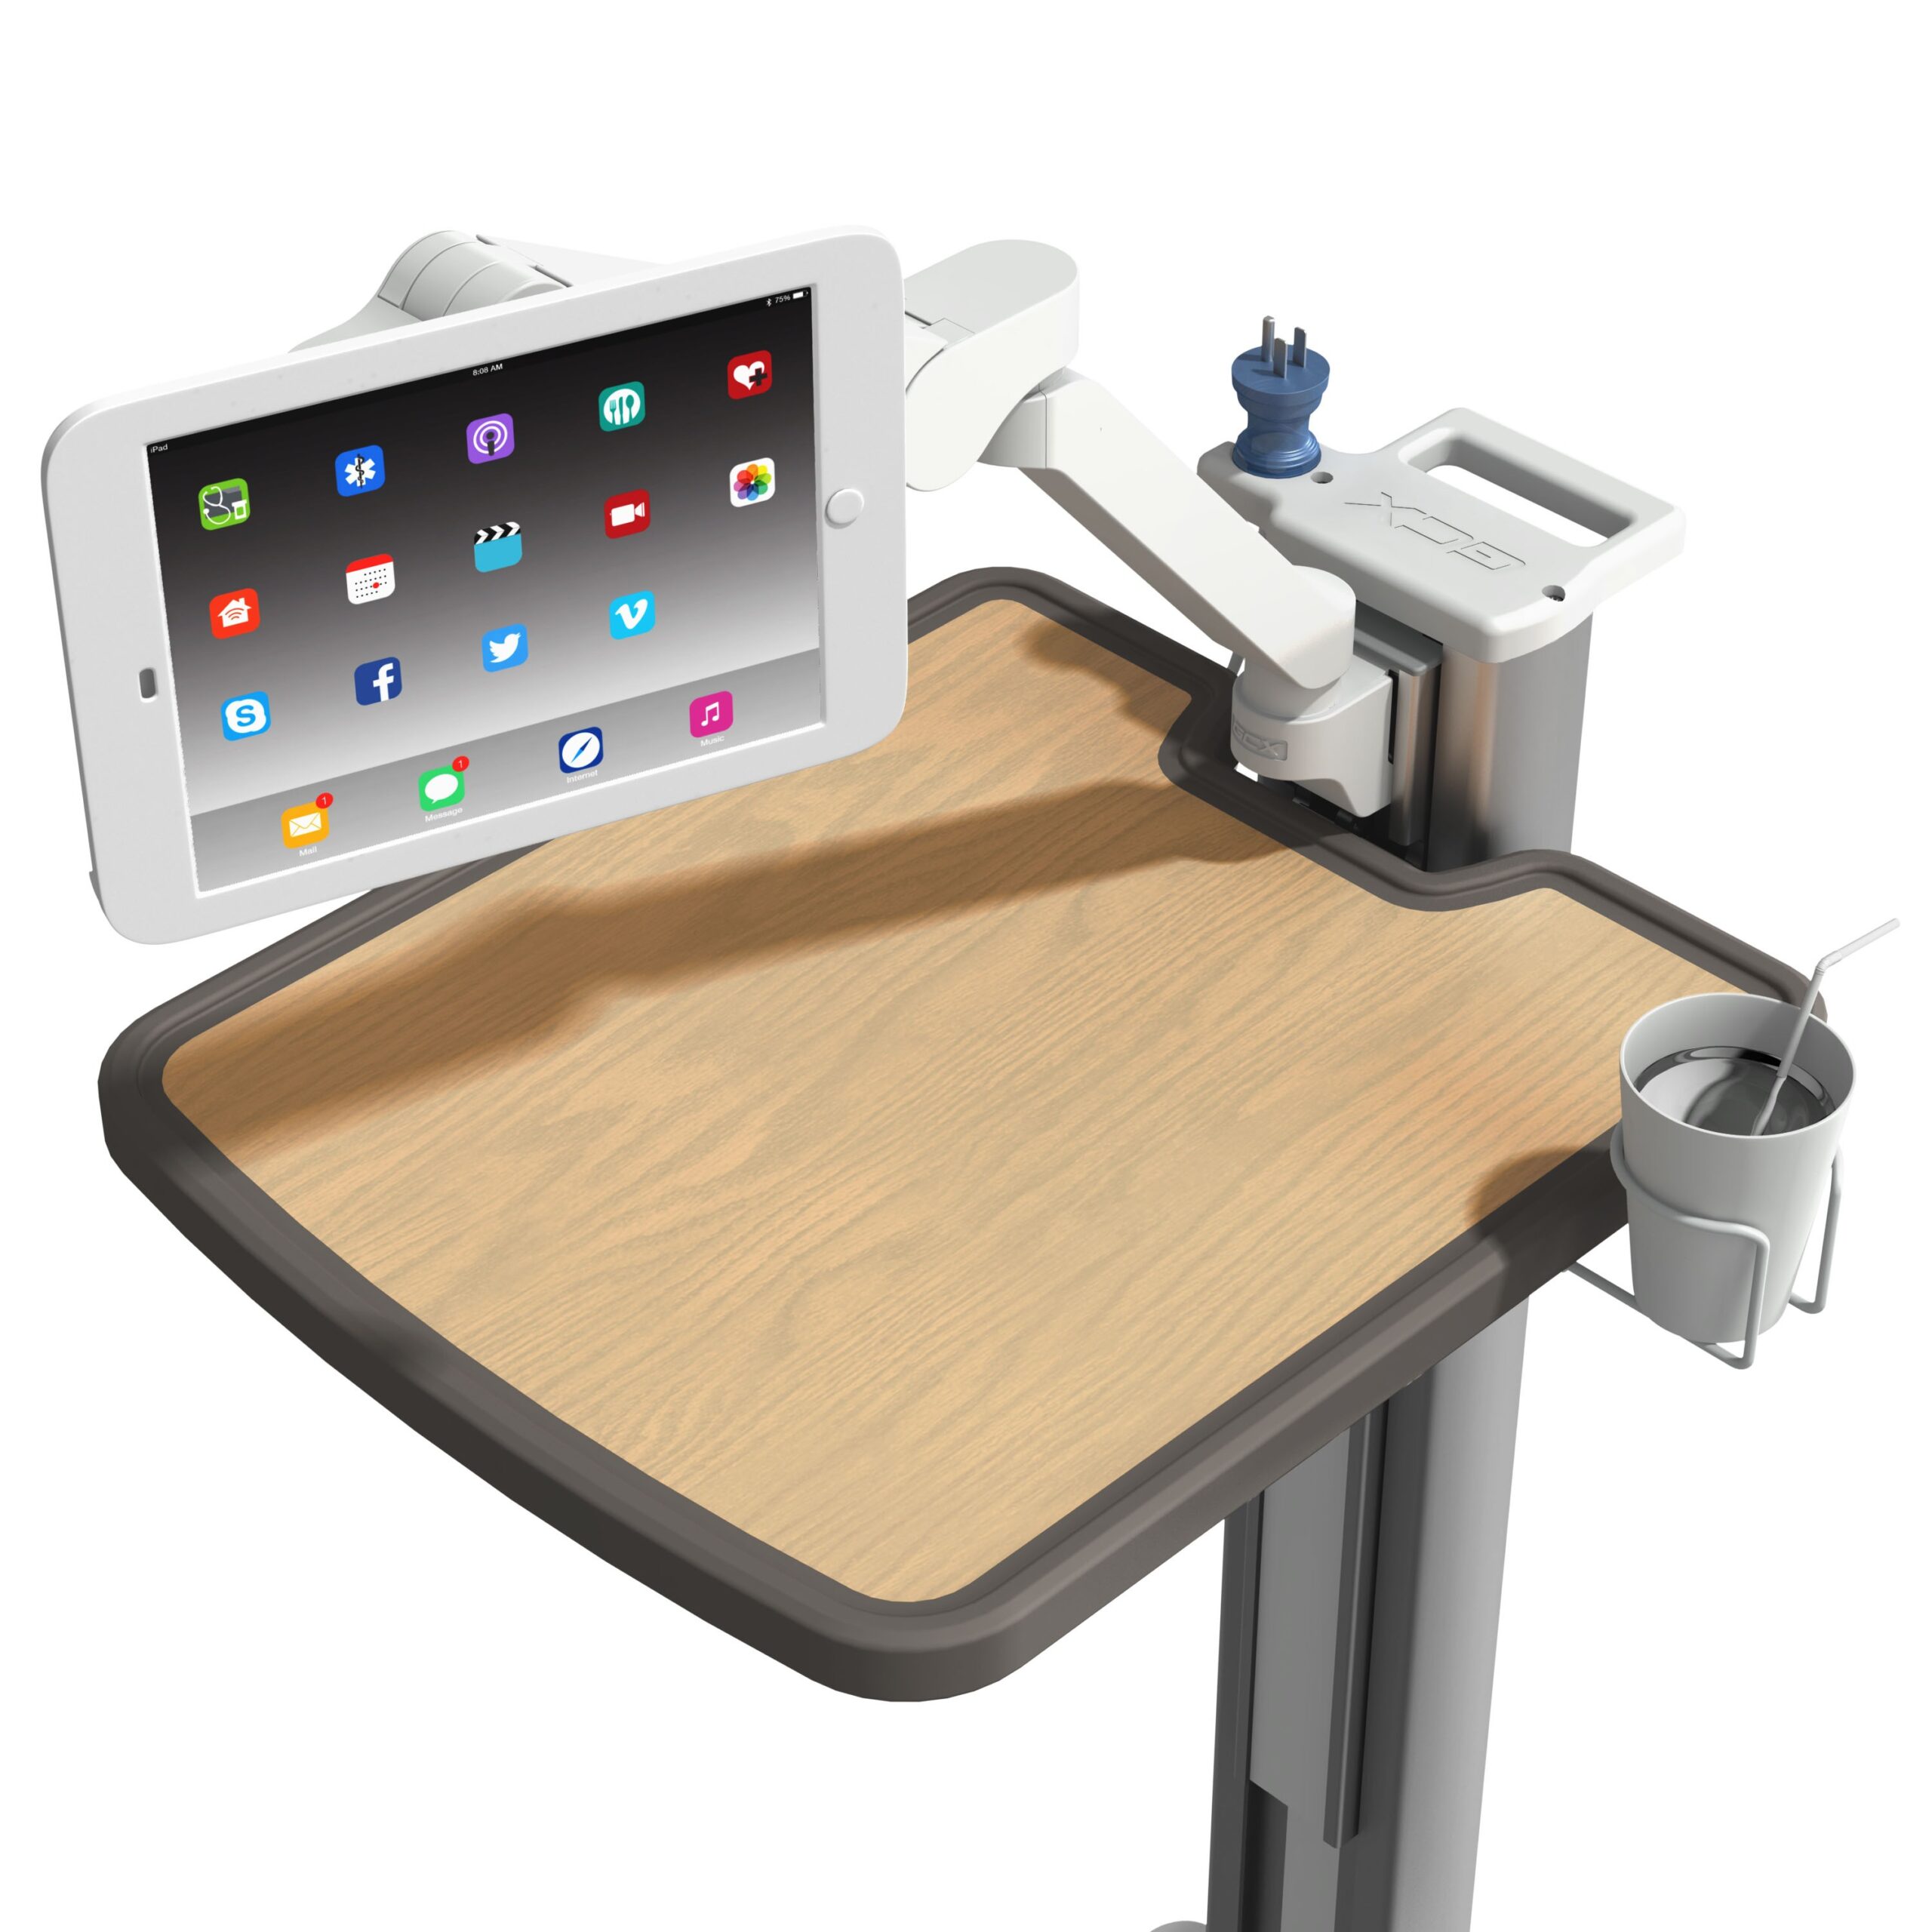 Cup Holder for Compact Patient Engagement Table